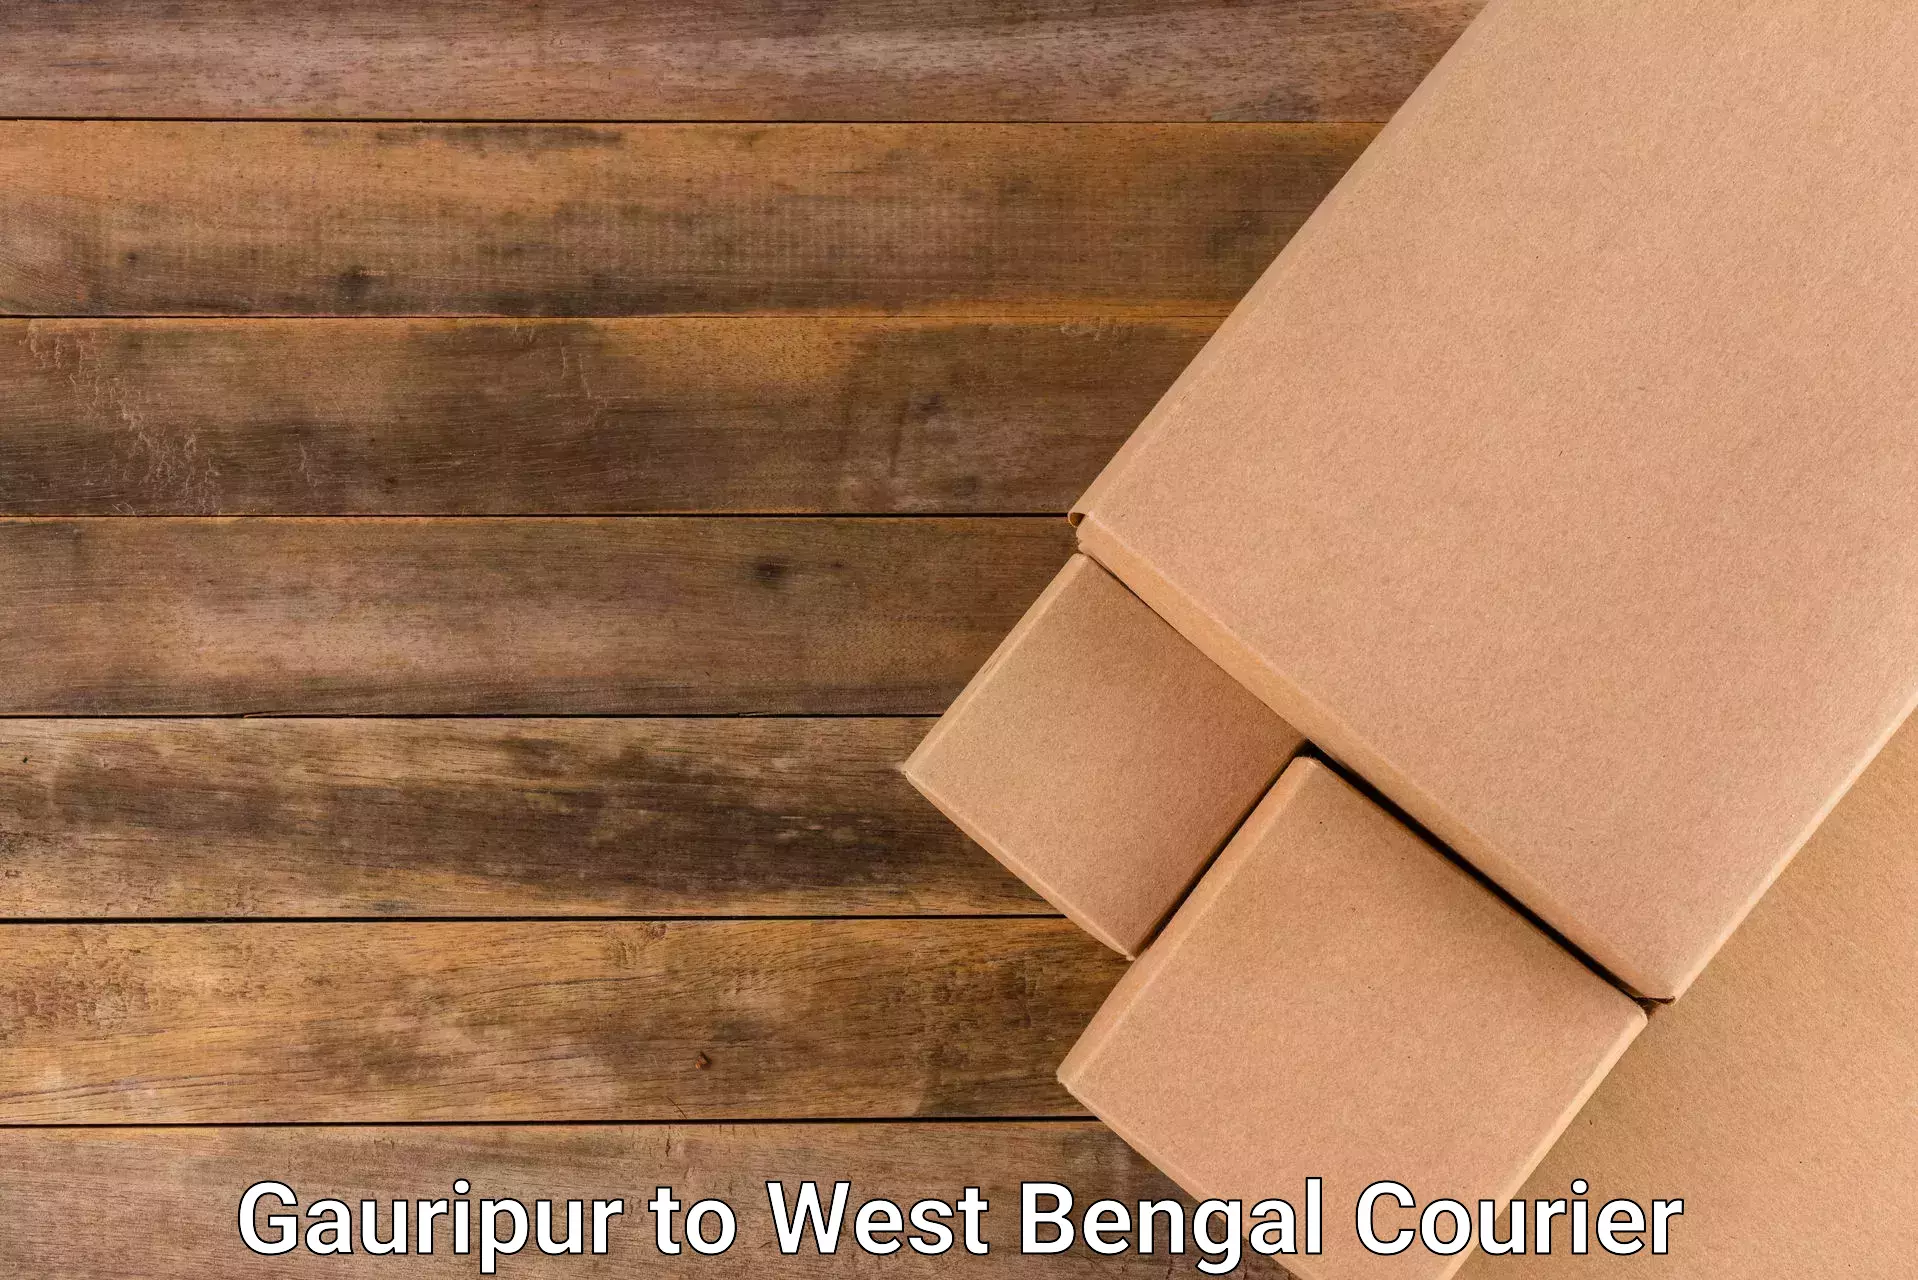 High-quality delivery services in Gauripur to Calcutta University Kolkata